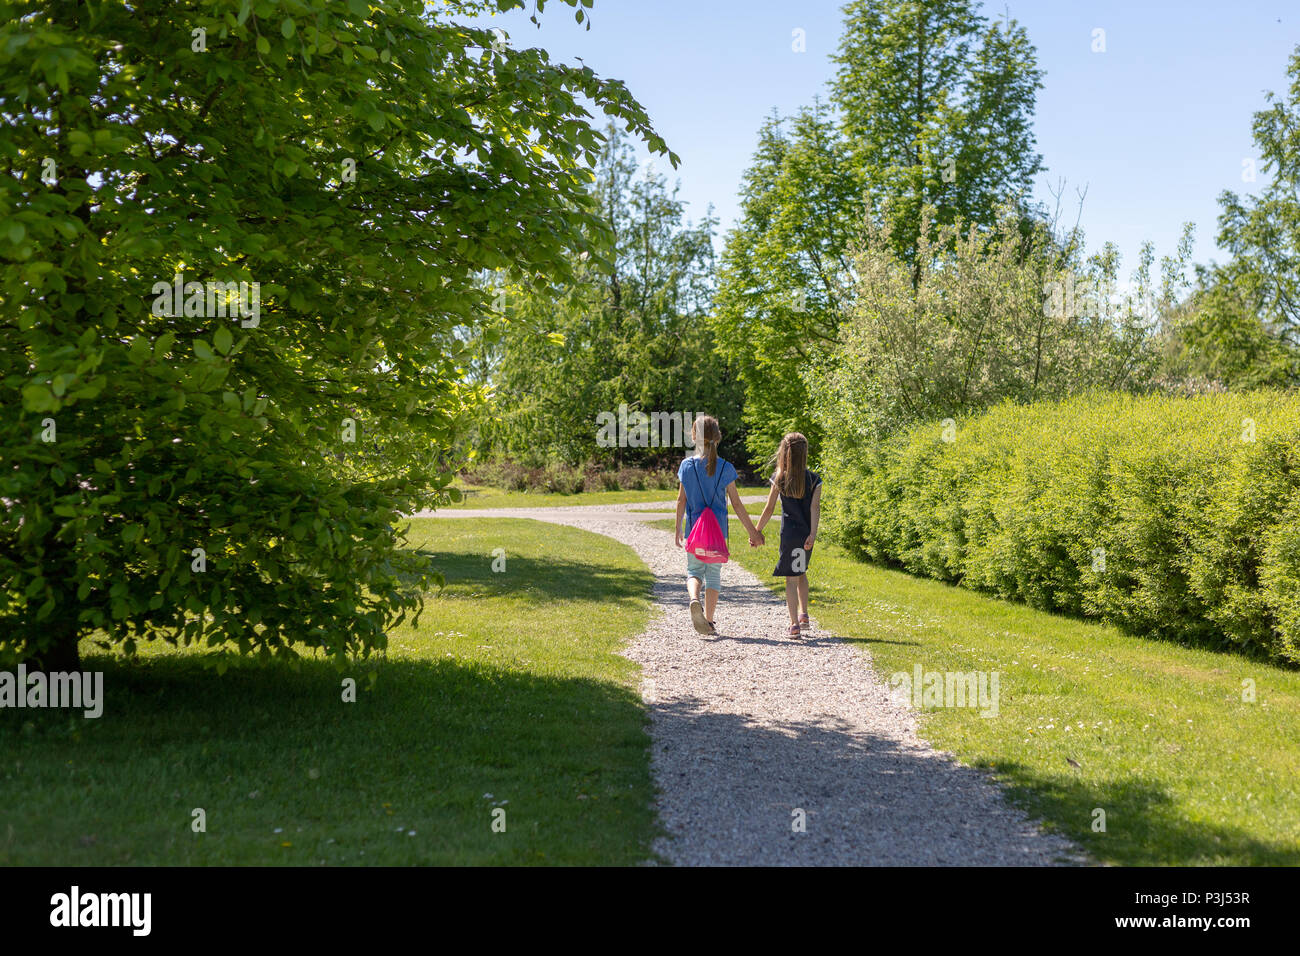 2 girls walk hand in hand on a dirt road in the park Stock Photo